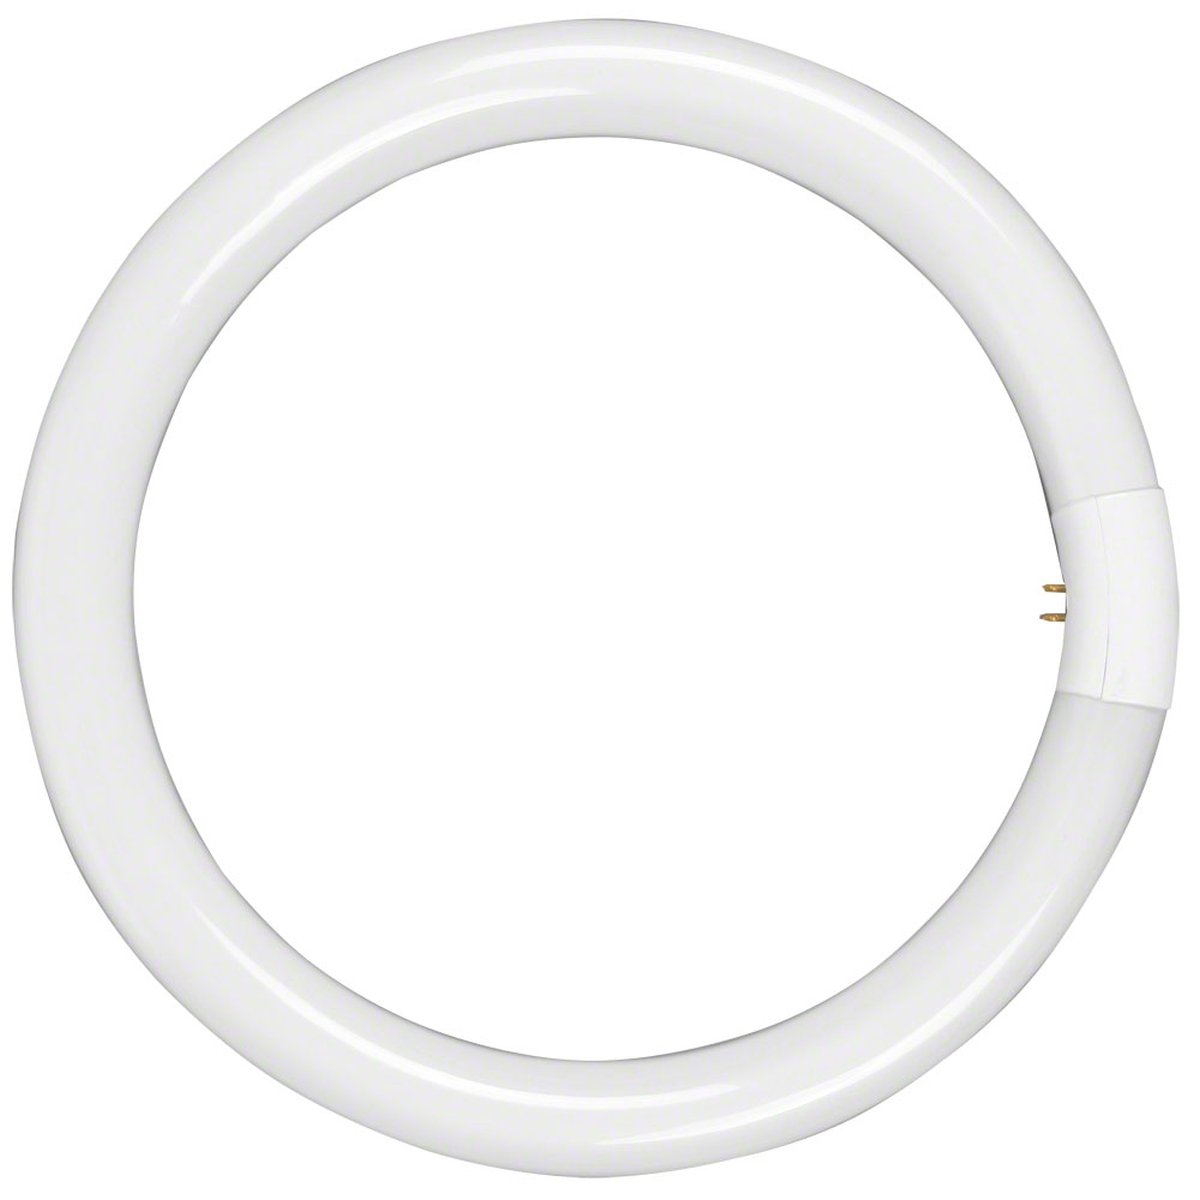 Walimex Lamp for Beauty Ring Light, 28W